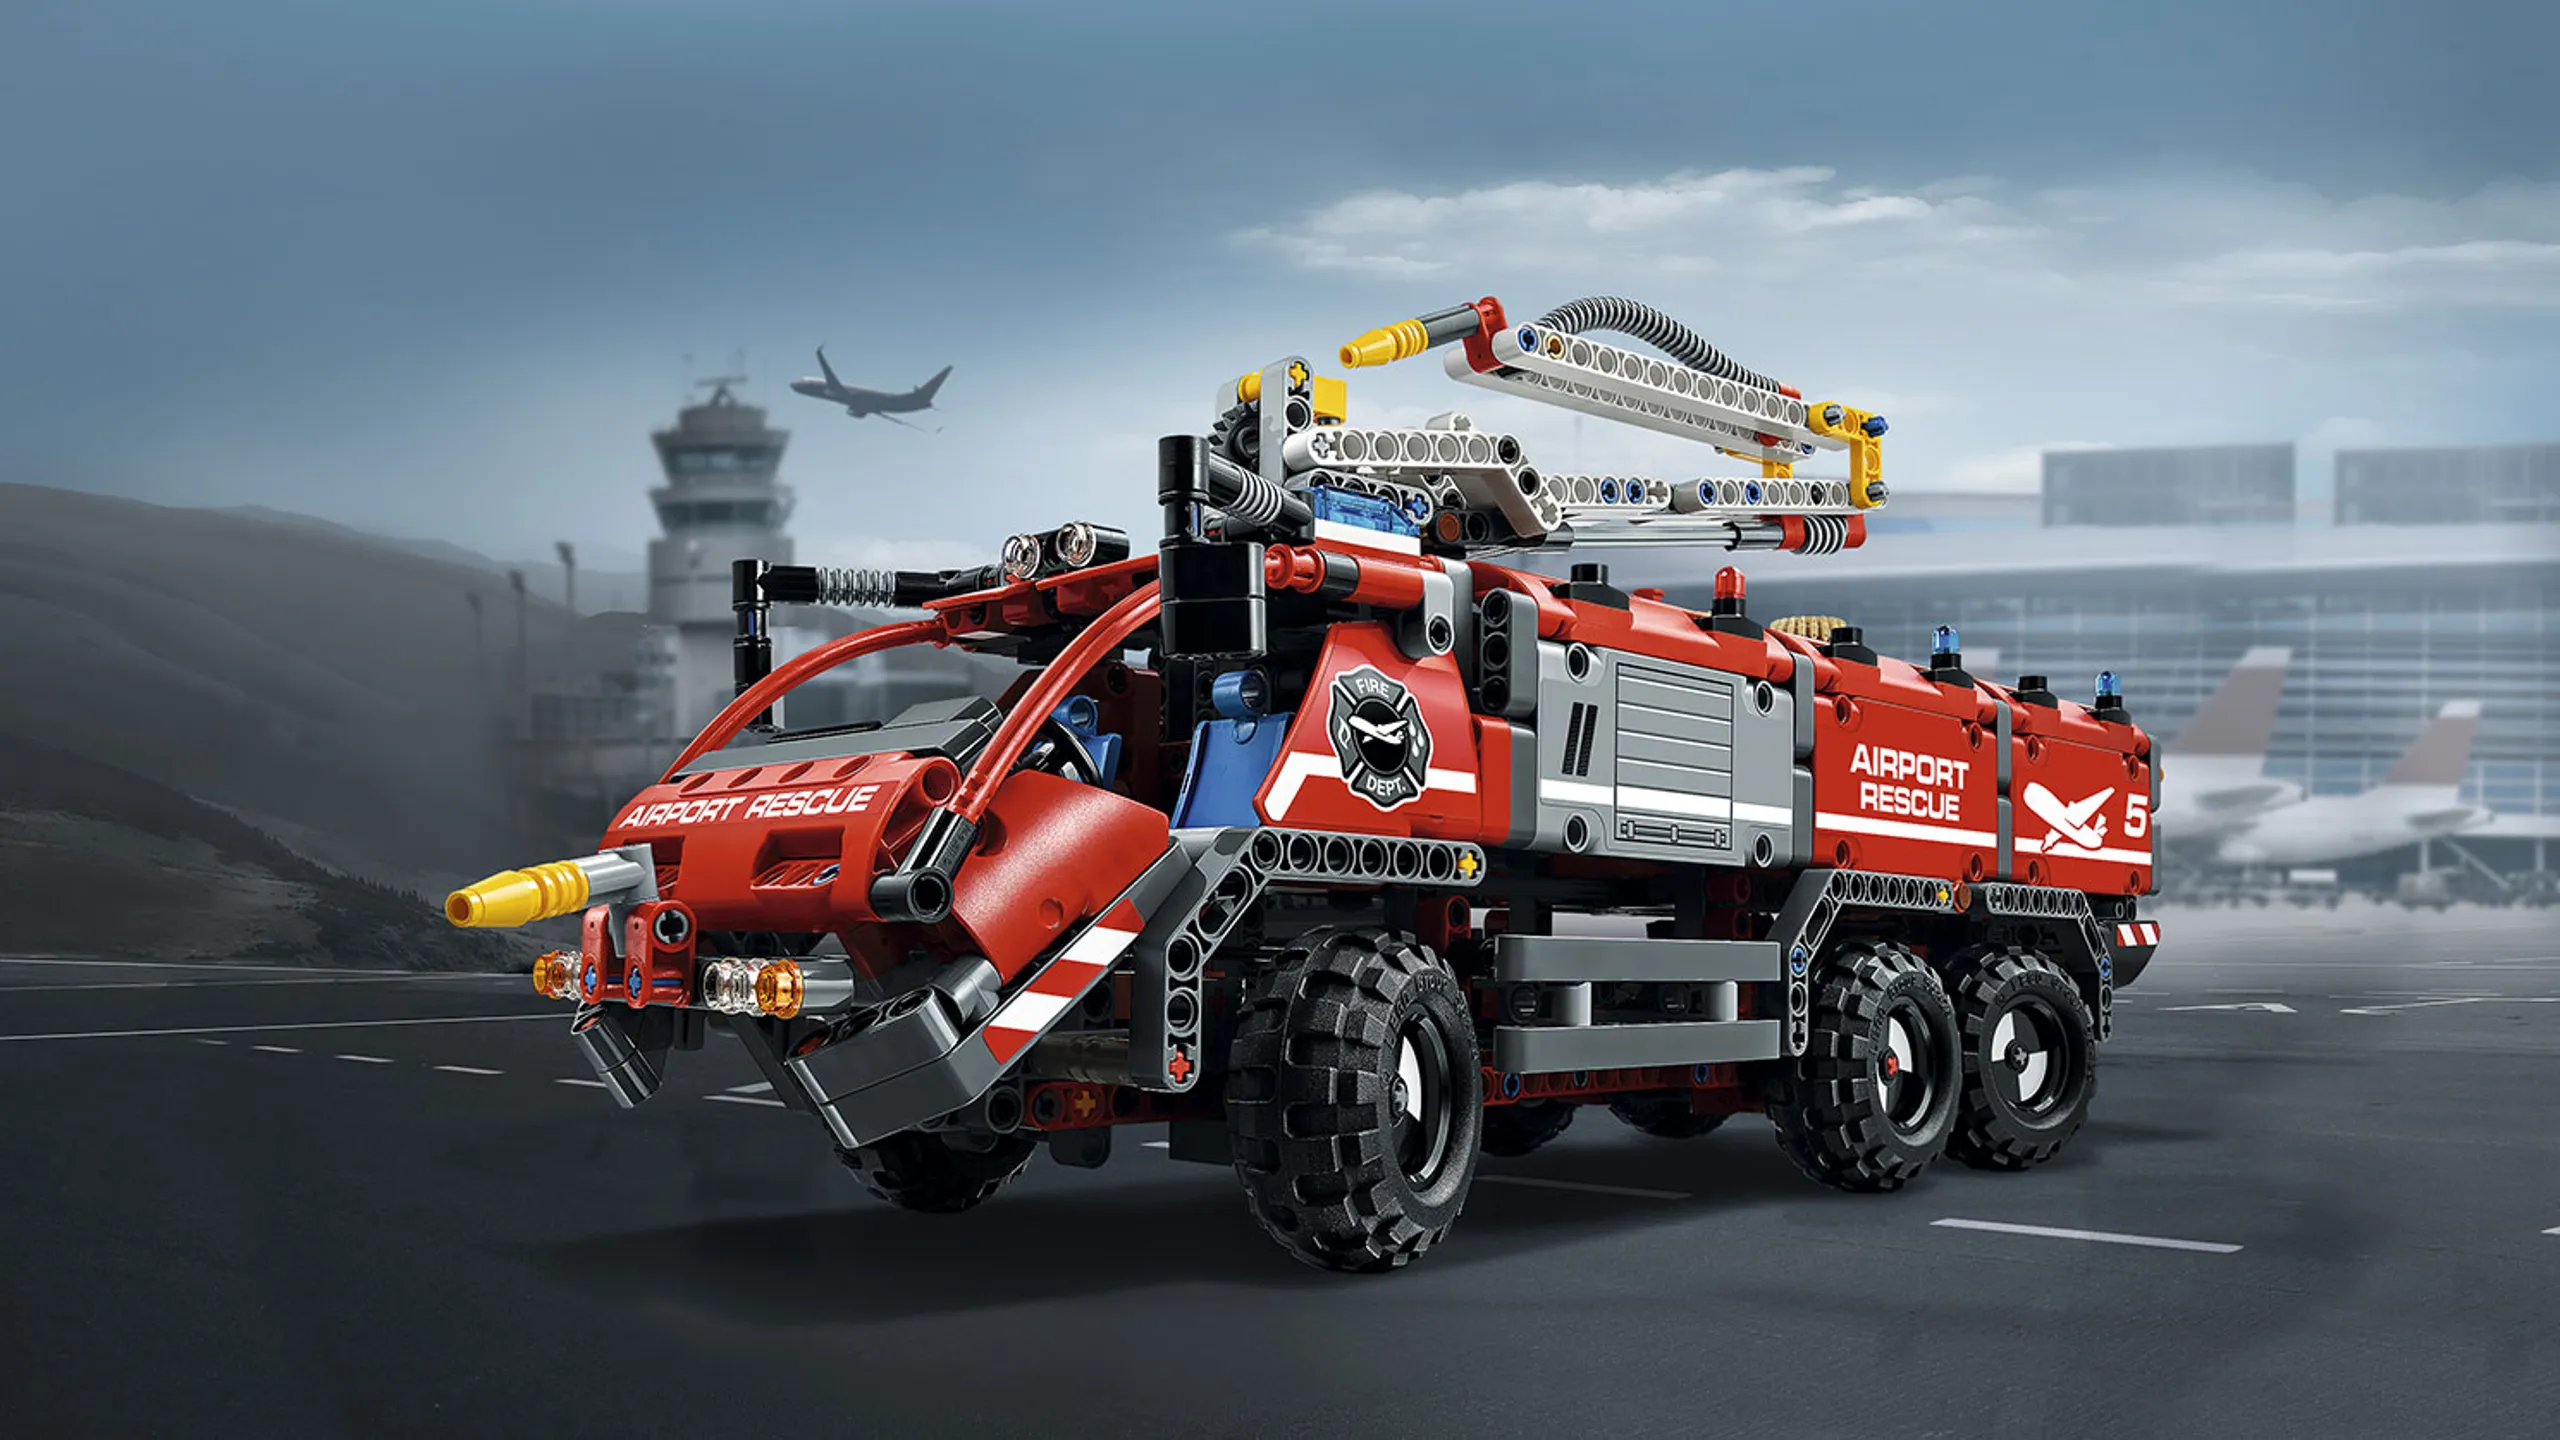 LEGO Technic - 42068 Airport Rescue Vehicle - the vehicle features a classic red color scheme, large driver’s cab, wing mirrors, opening tool storage compartment, four-cylinder engine with moving pistons, twin-axle steering, double rear axle and chunky tires.